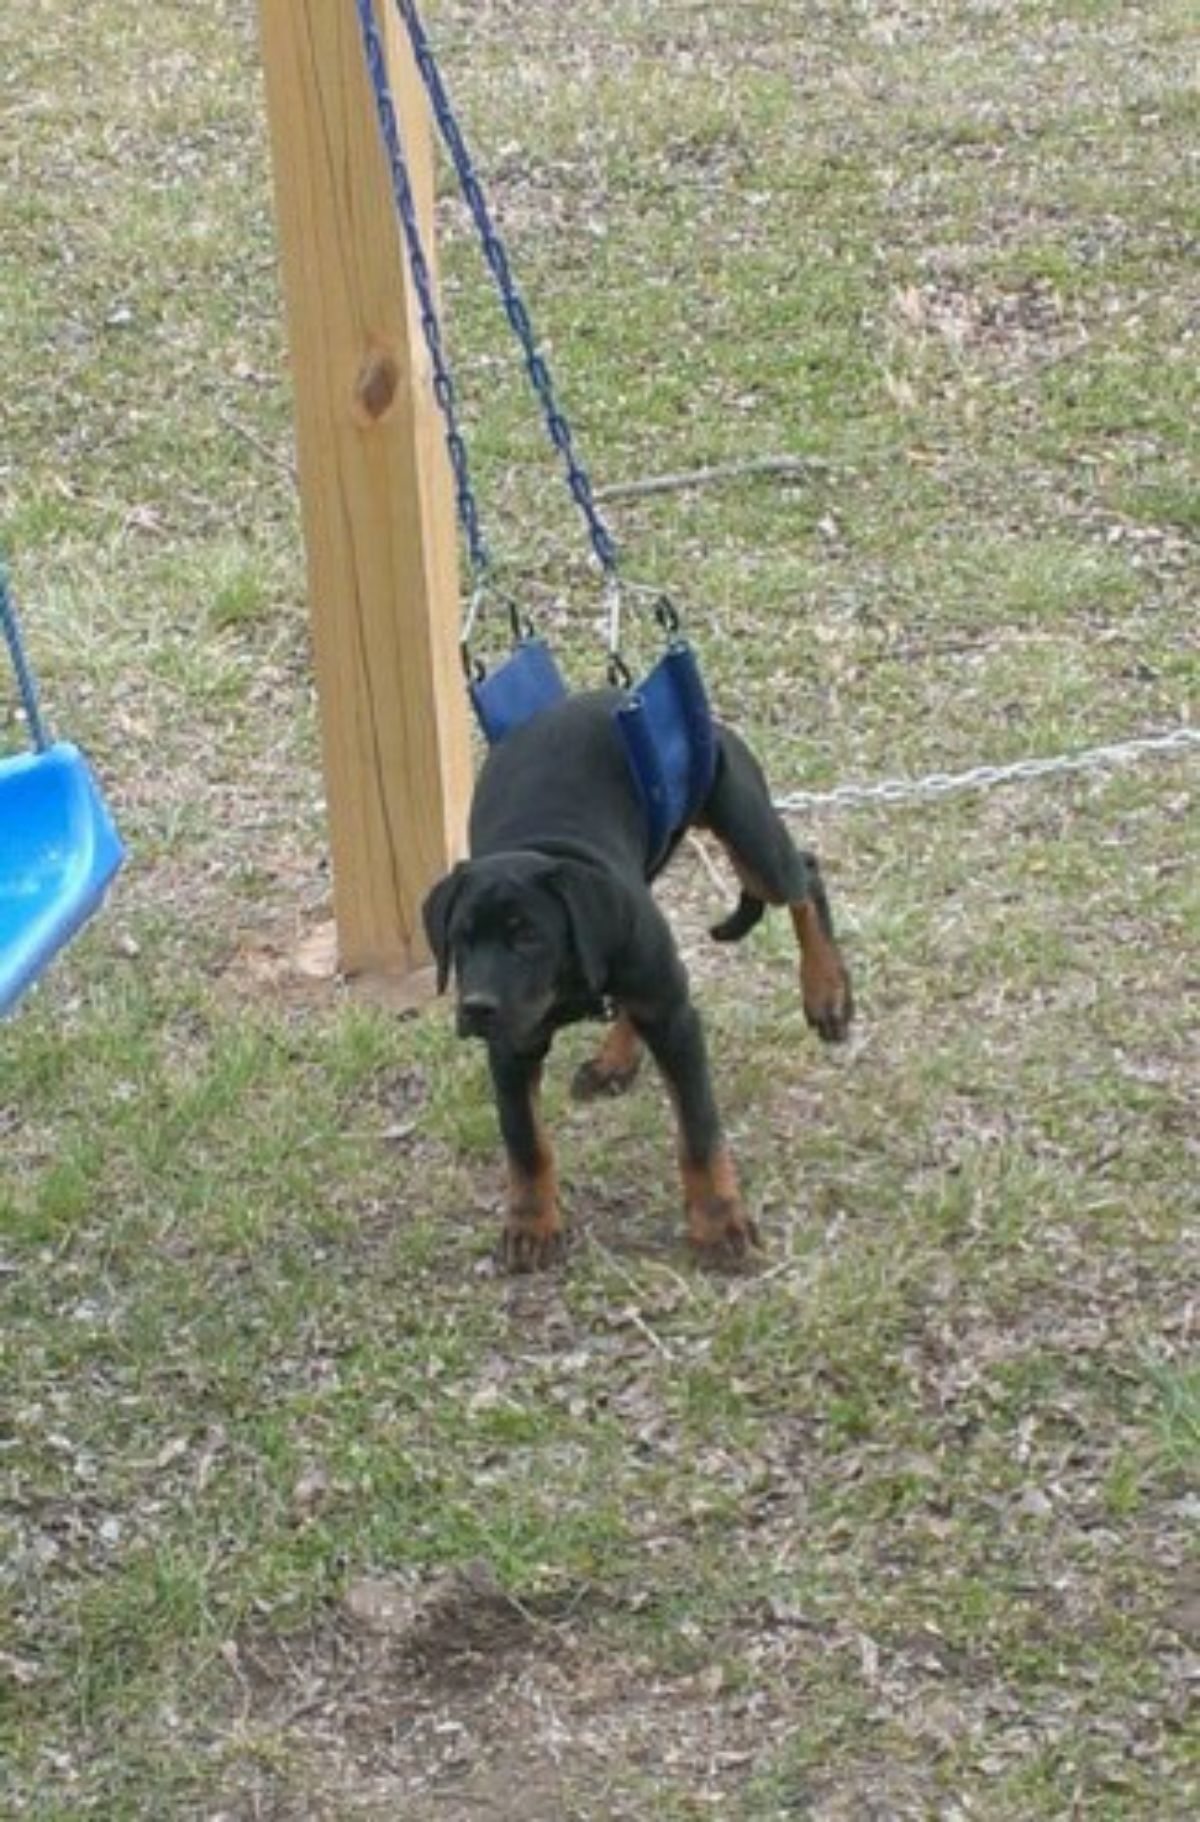 brown and black dog stuck with the body on a blue swing with the back legs off the ground